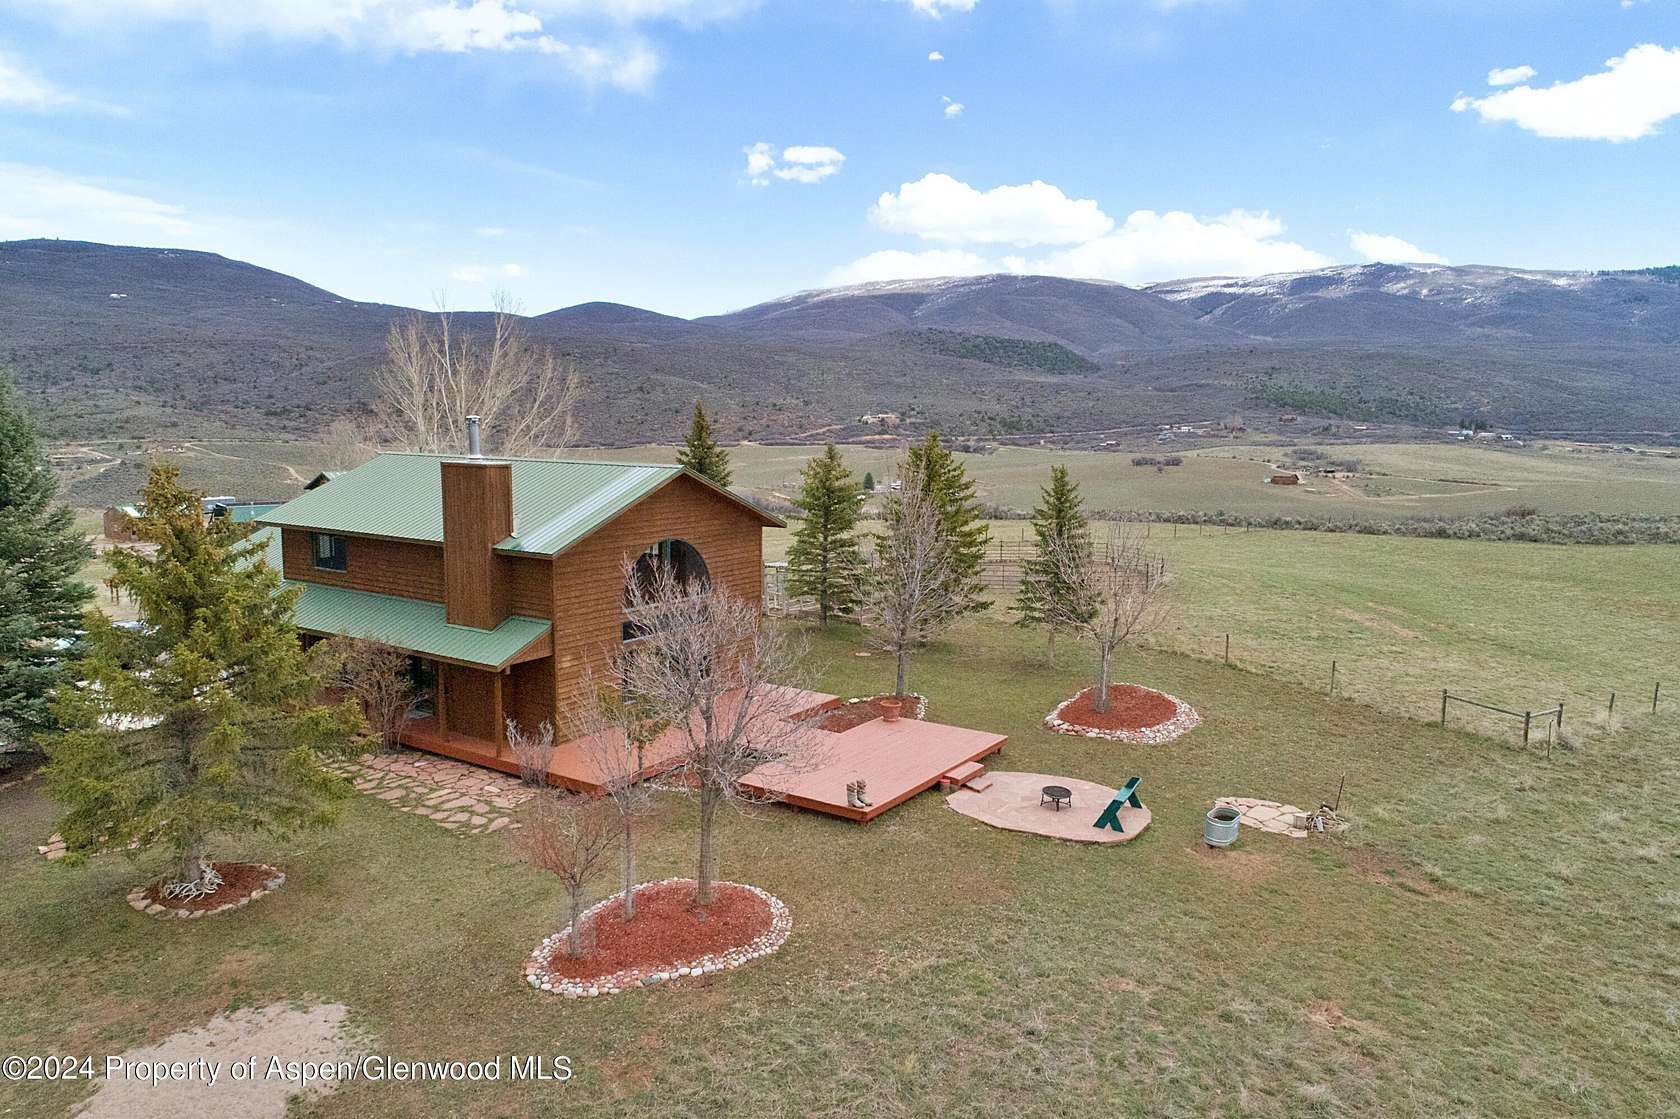 6.2 Acres of Land with Home for Sale in Glenwood Springs, Colorado